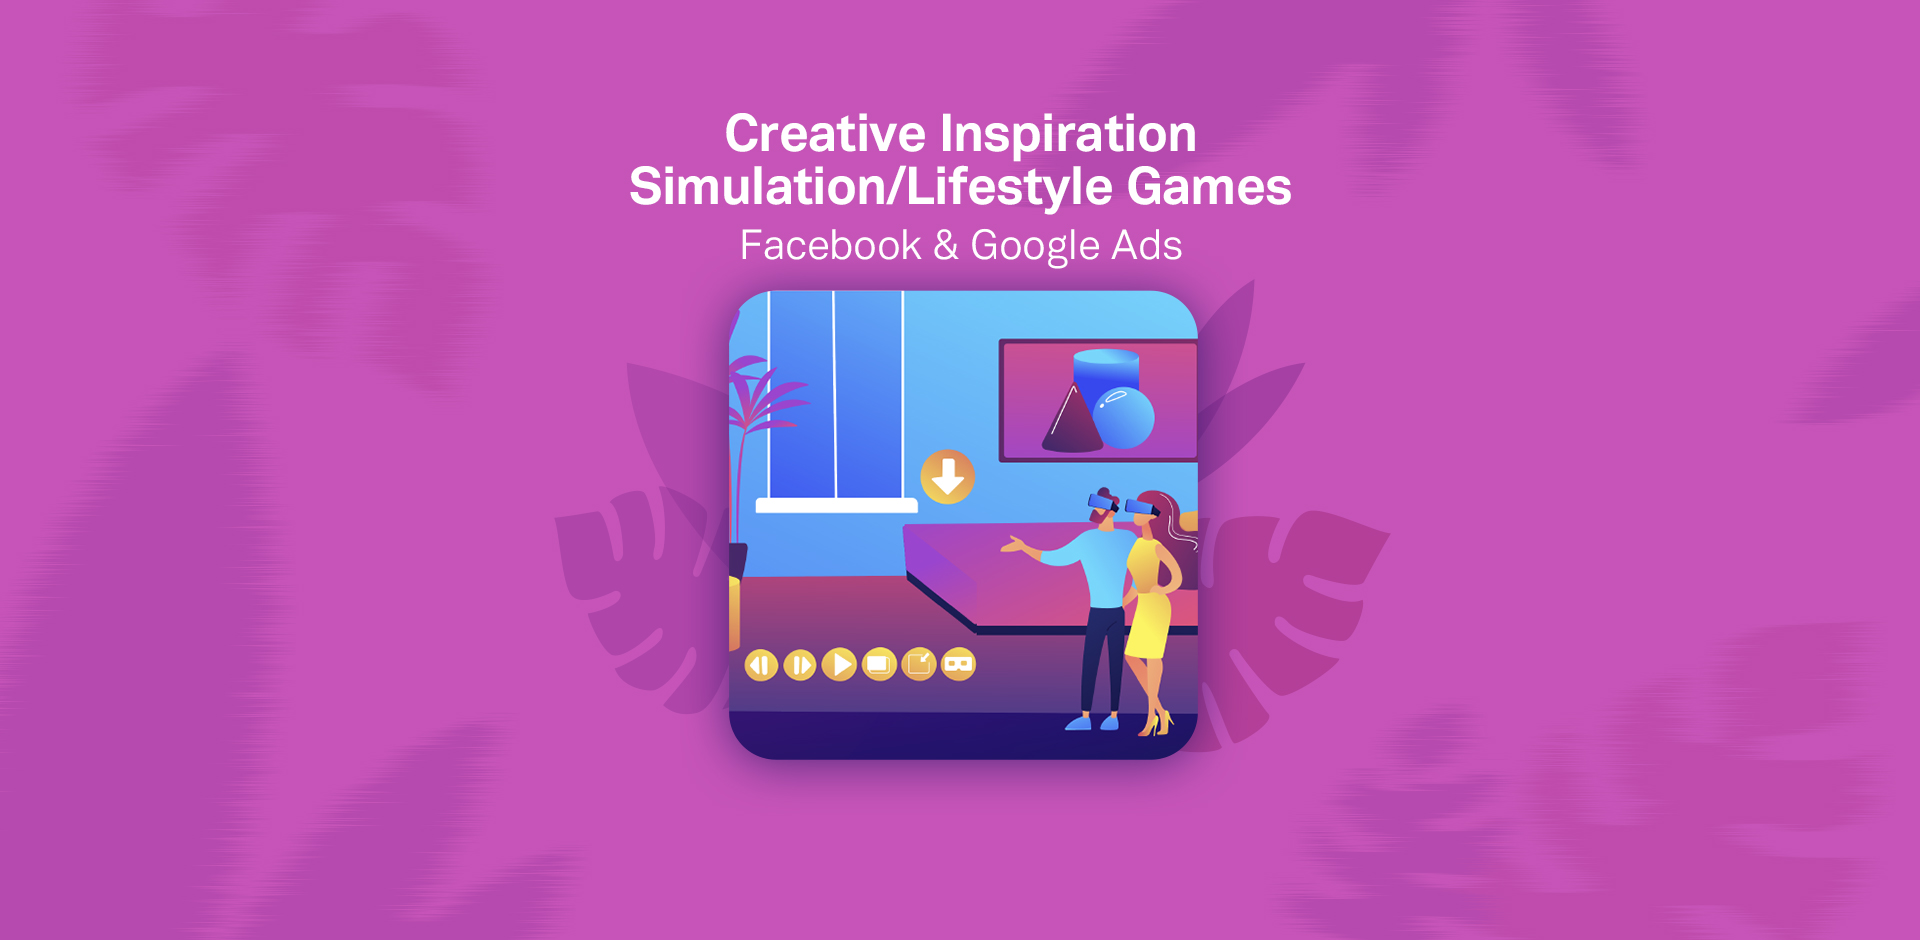 Simulation / Lifestyle Games Creative Strategy